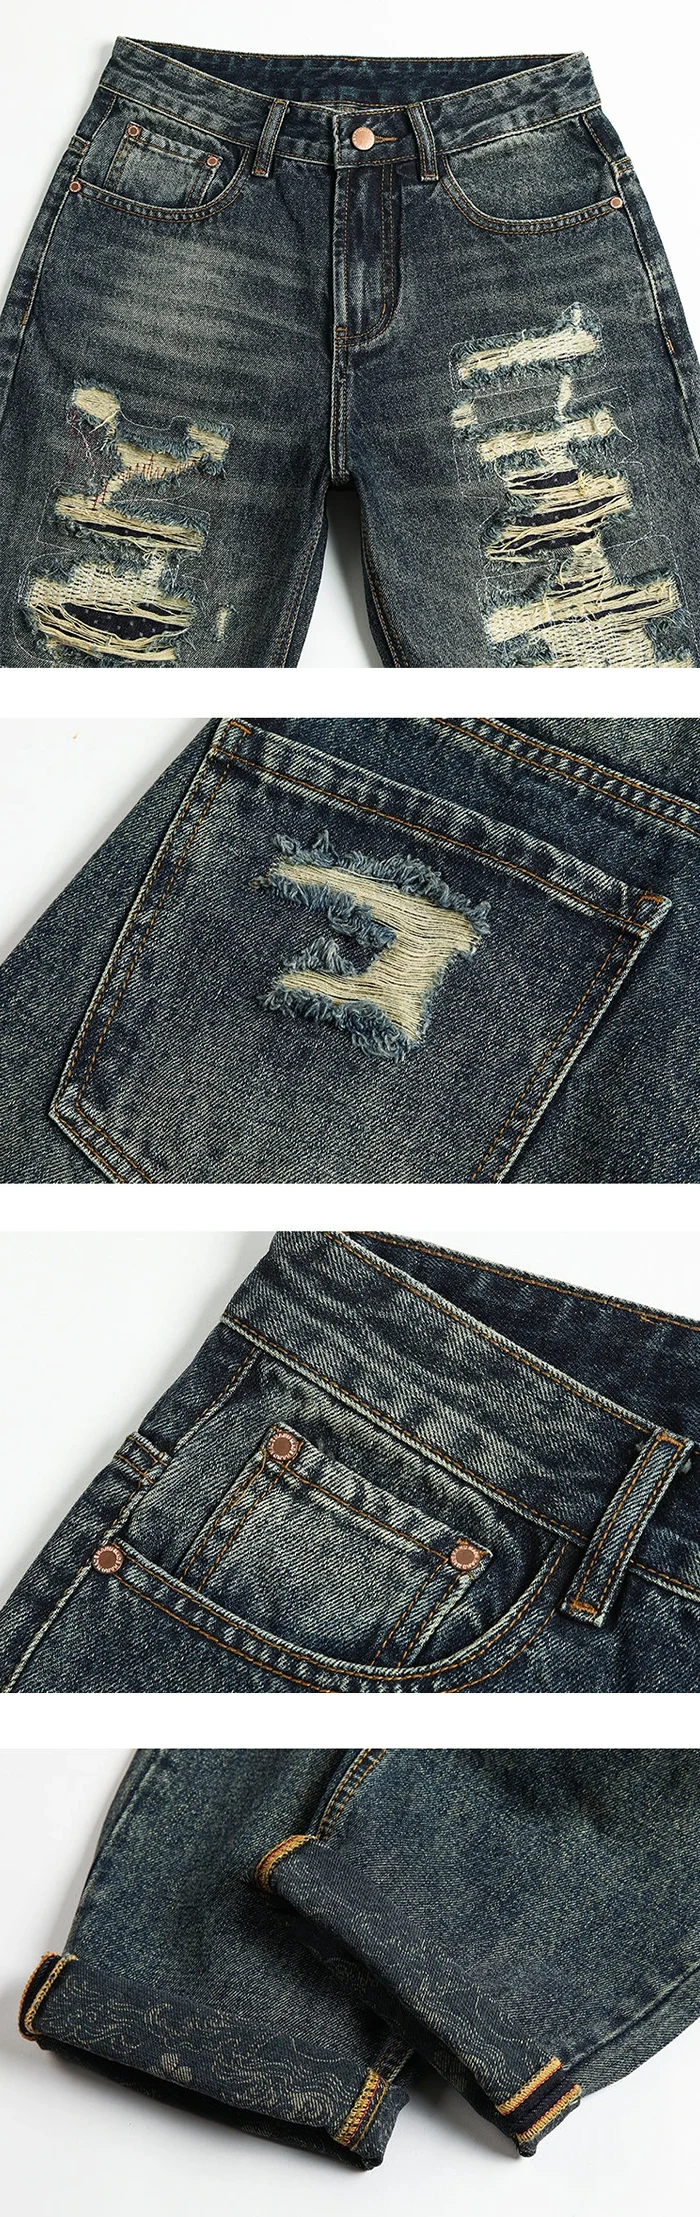 more details of the Jeans streetwear "Annaka"